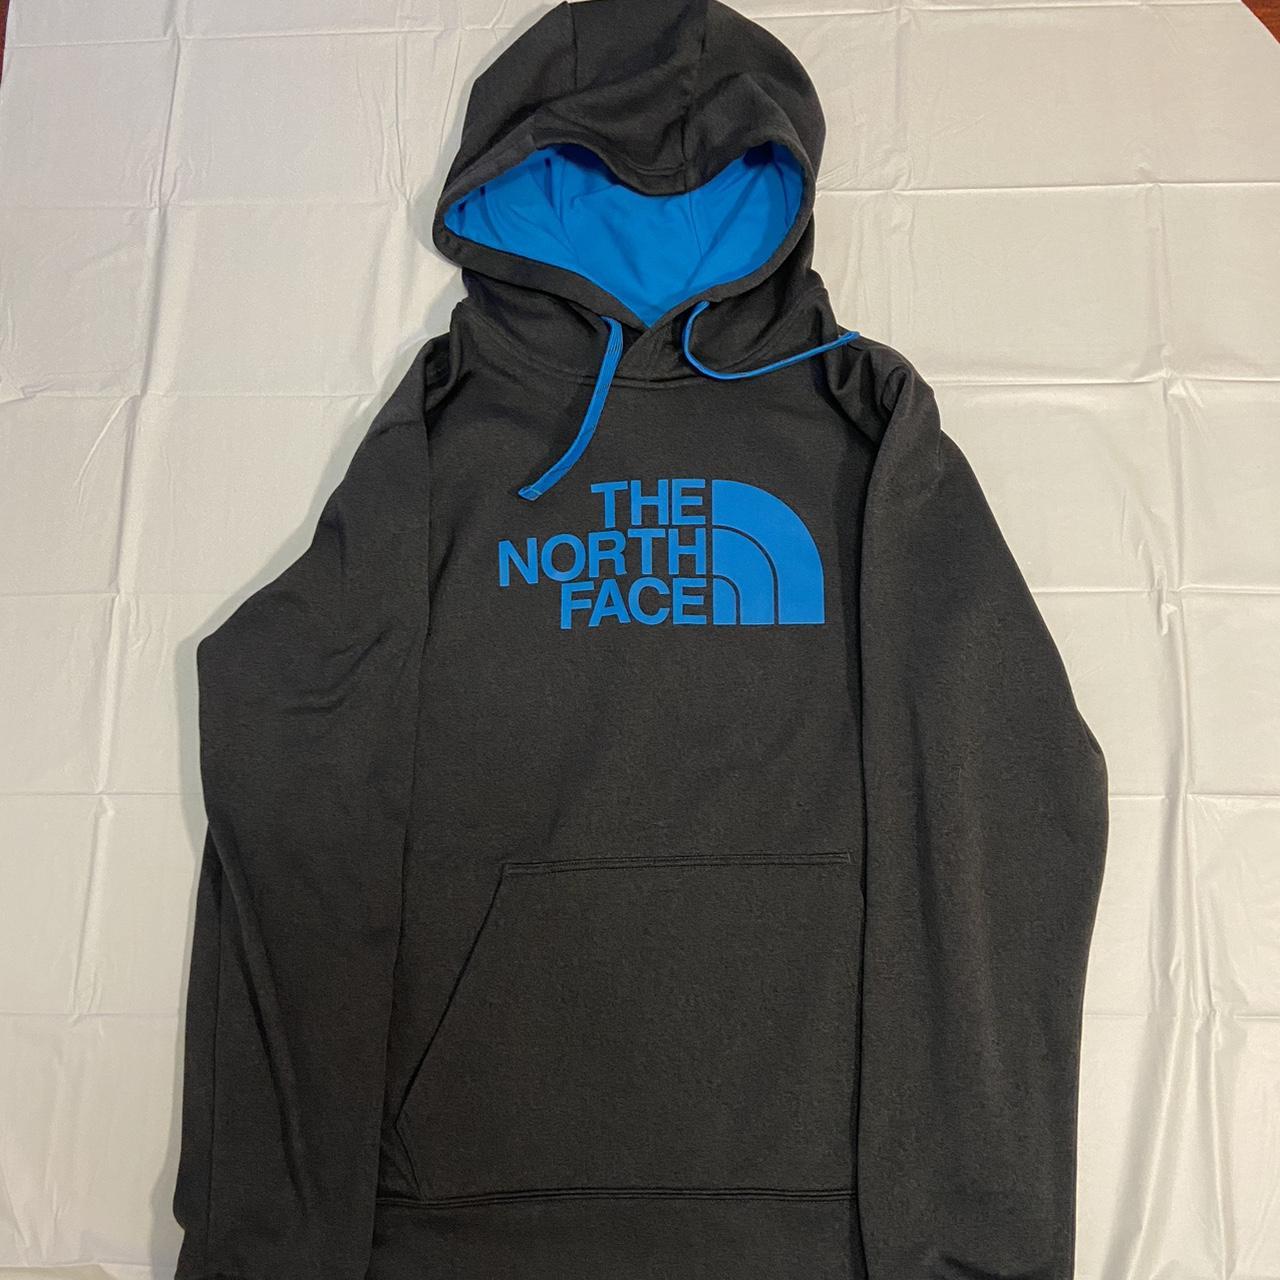 The North Face Men's Hoodie